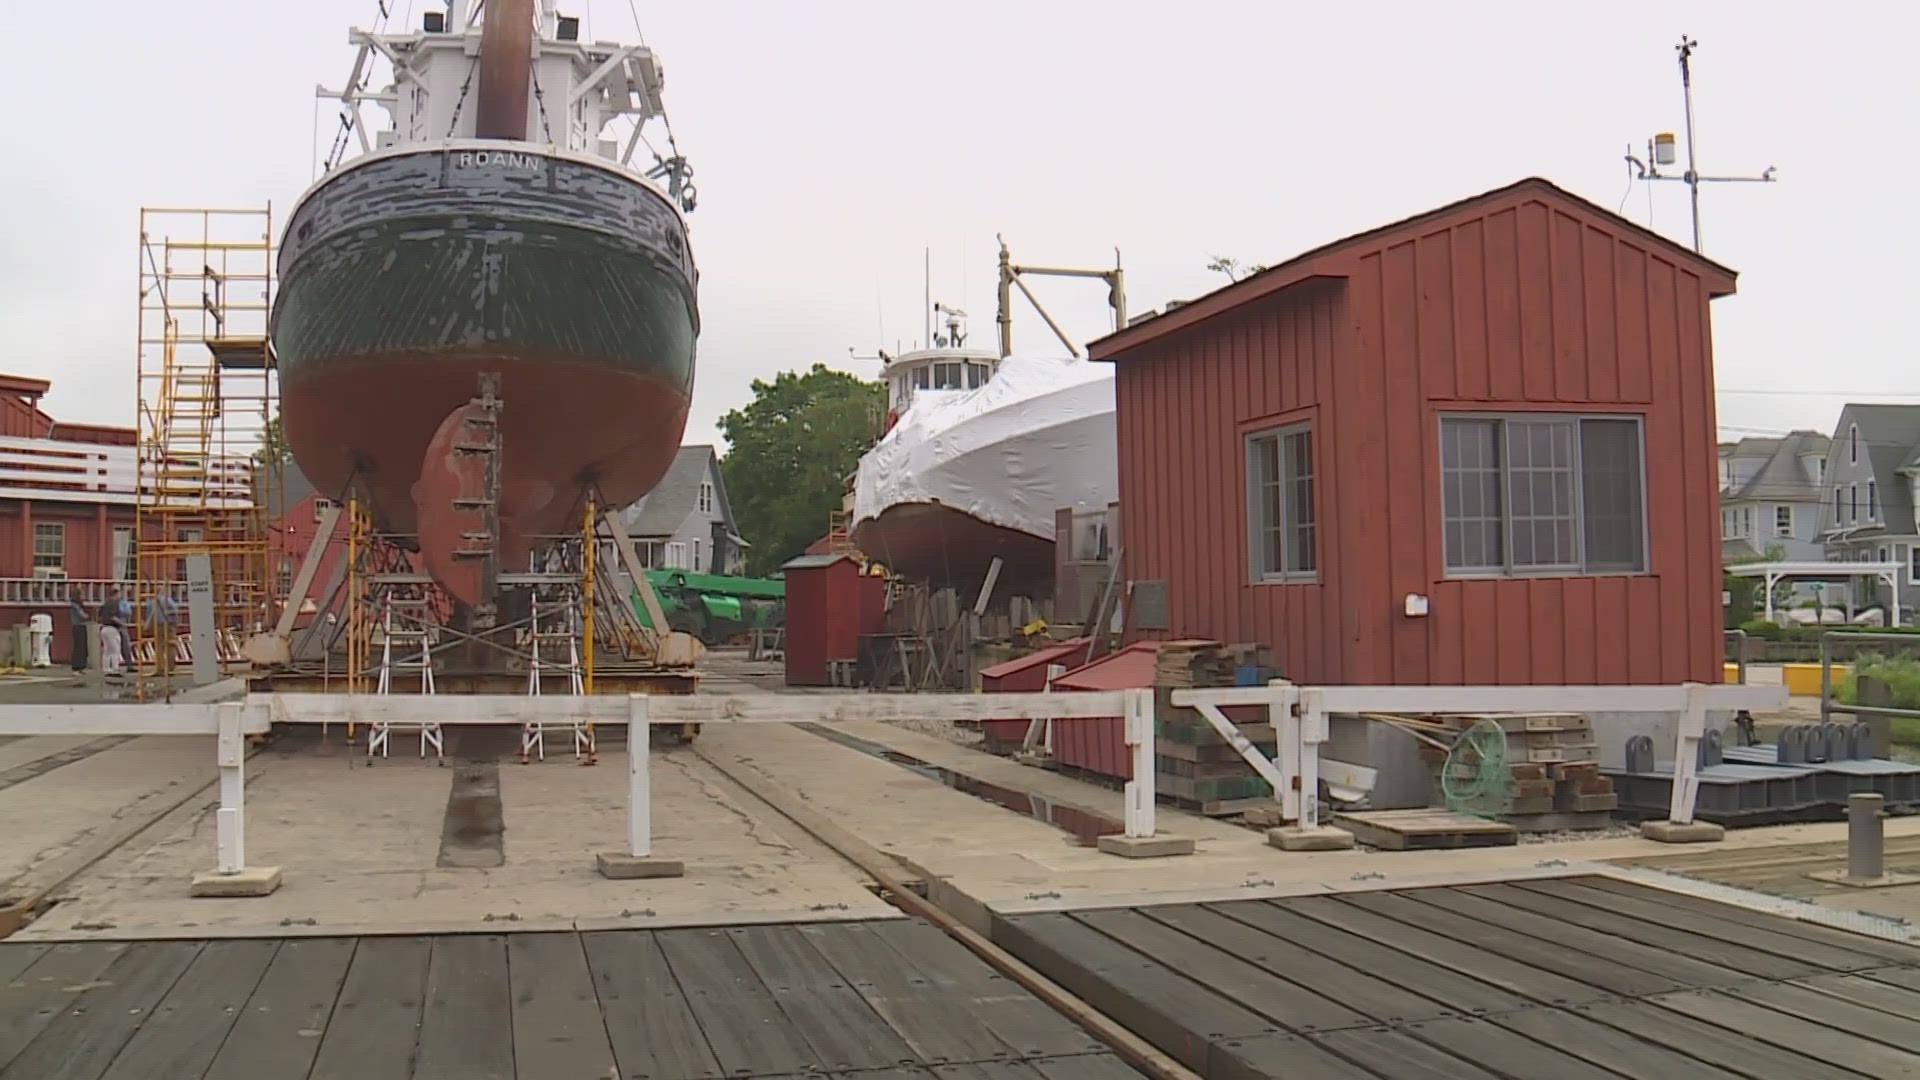 This summer, there are five major preservation projects happening at the shipyard.